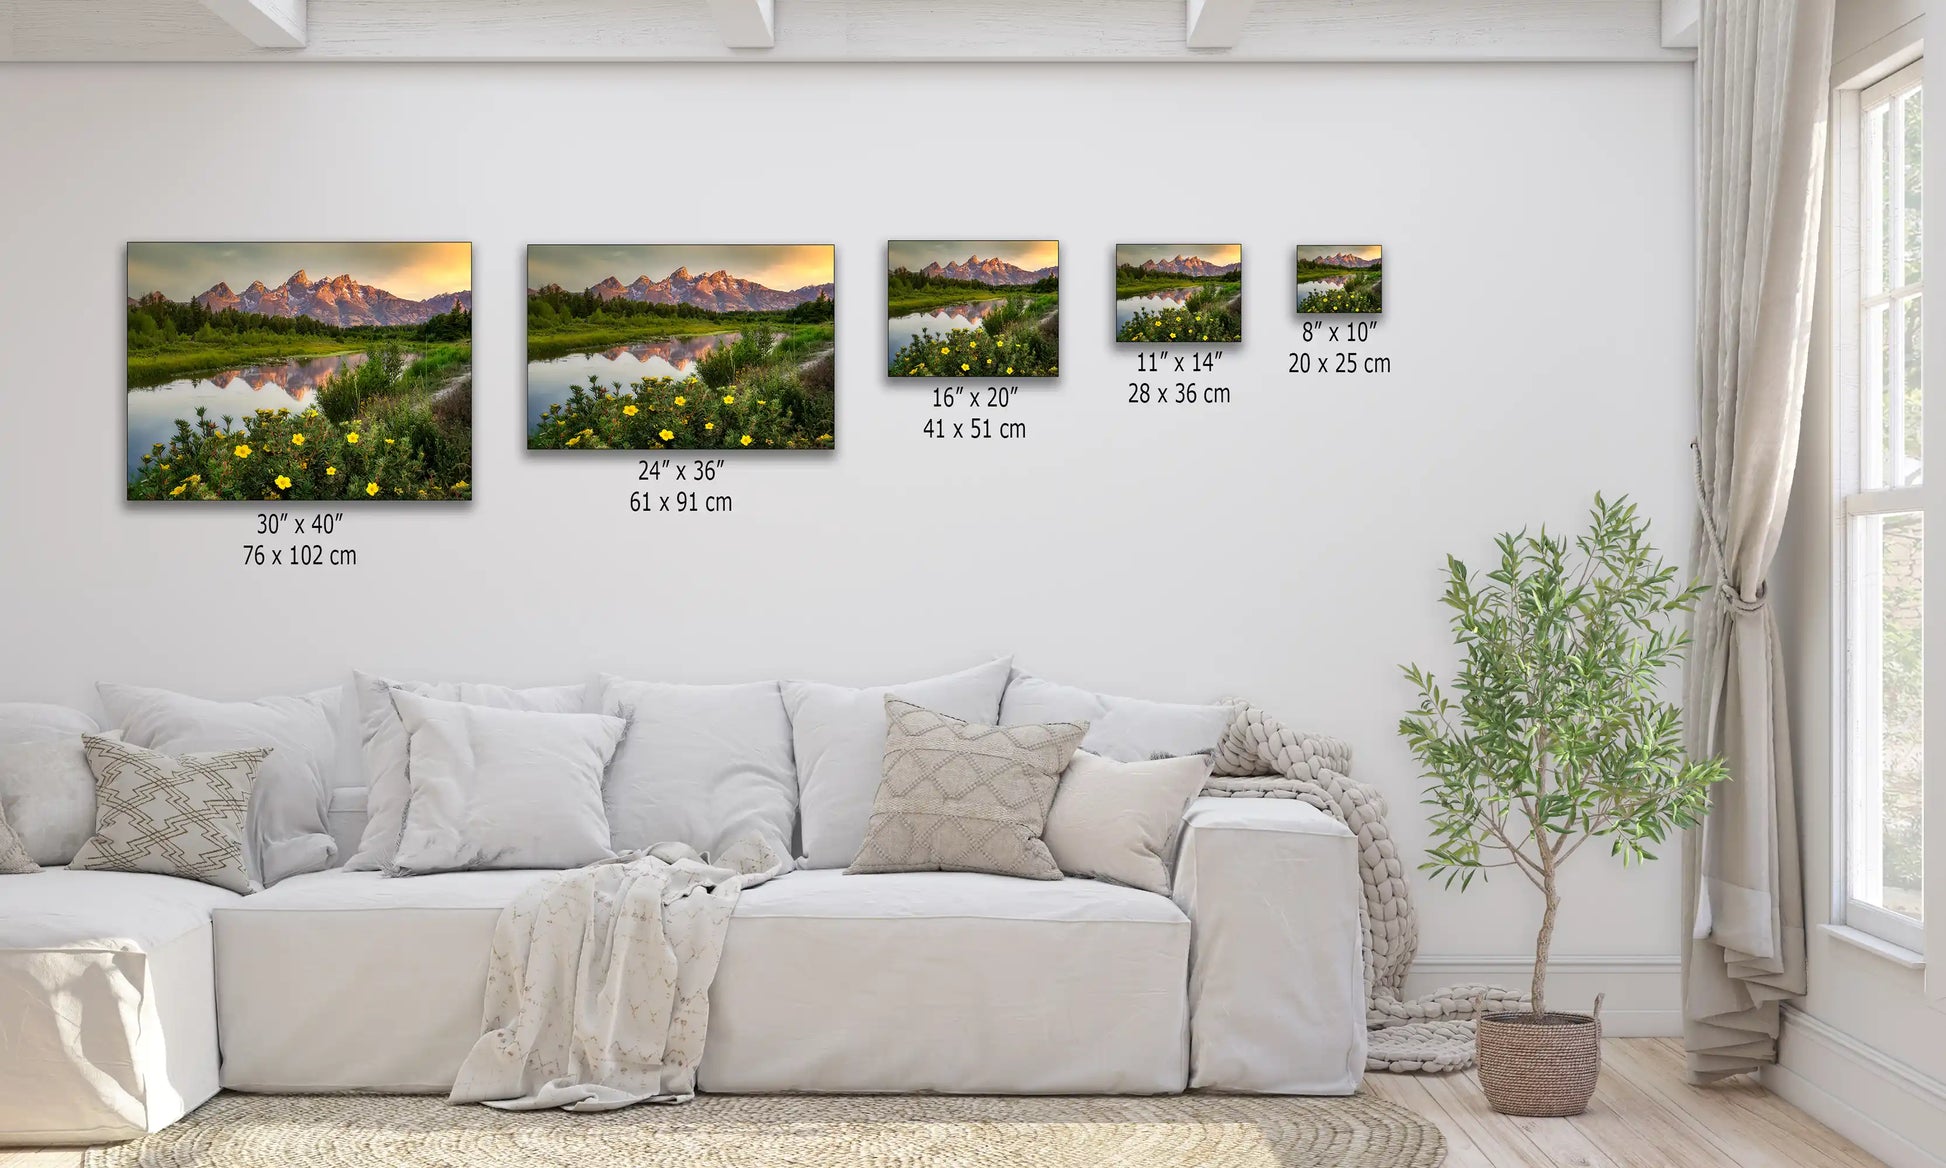 A series of canvas prints in varying sizes displayed over a couch, each depicting the Grand Teton Mountains at sunrise with lush wildflowers.